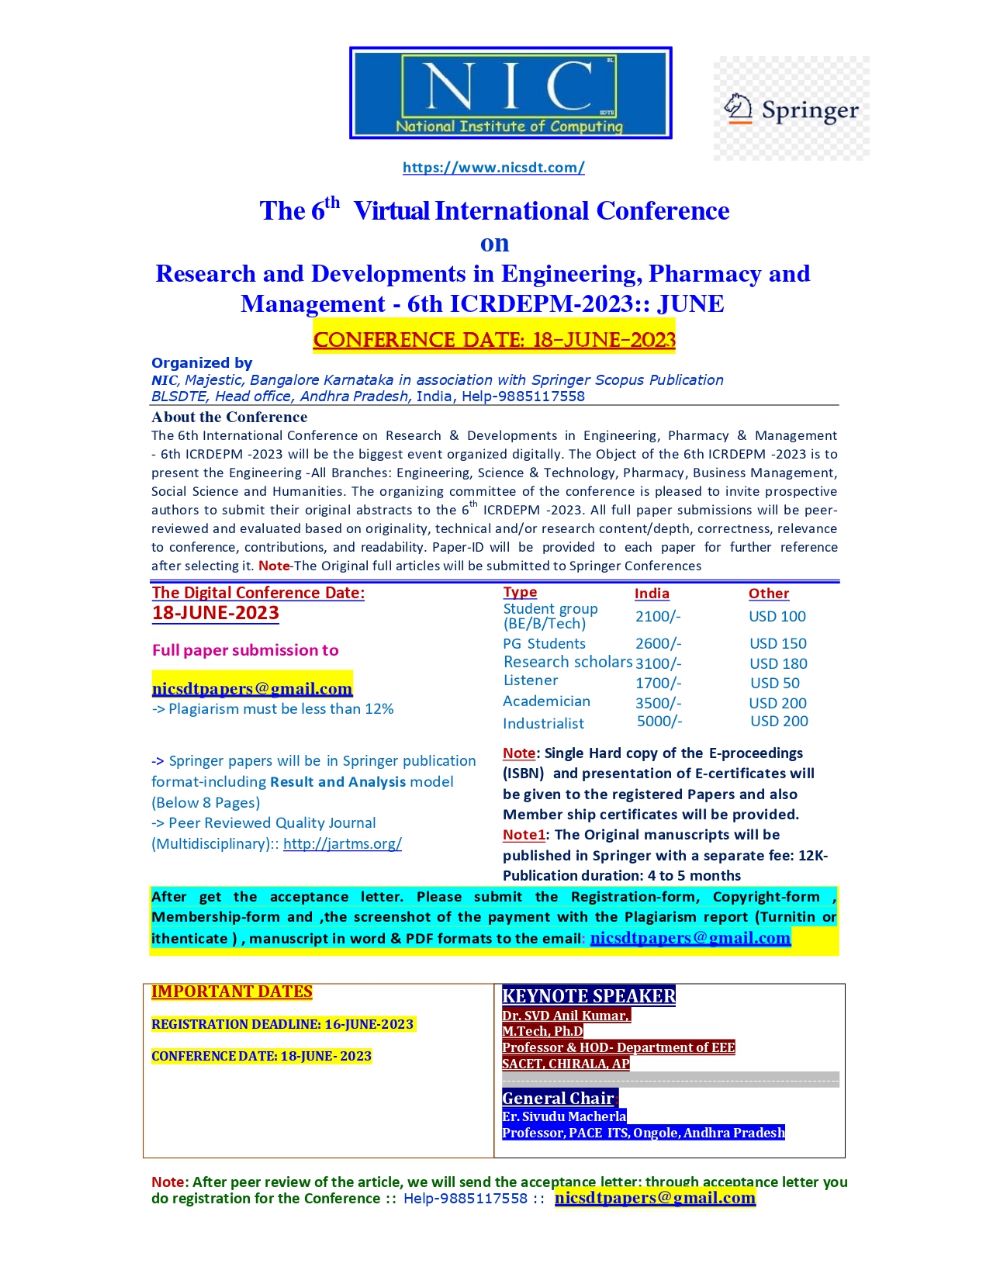 The 6th Virtual International Conference on Research and Developments in Engineering, Pharmacy and Management - 6th ICRDEPM-2023